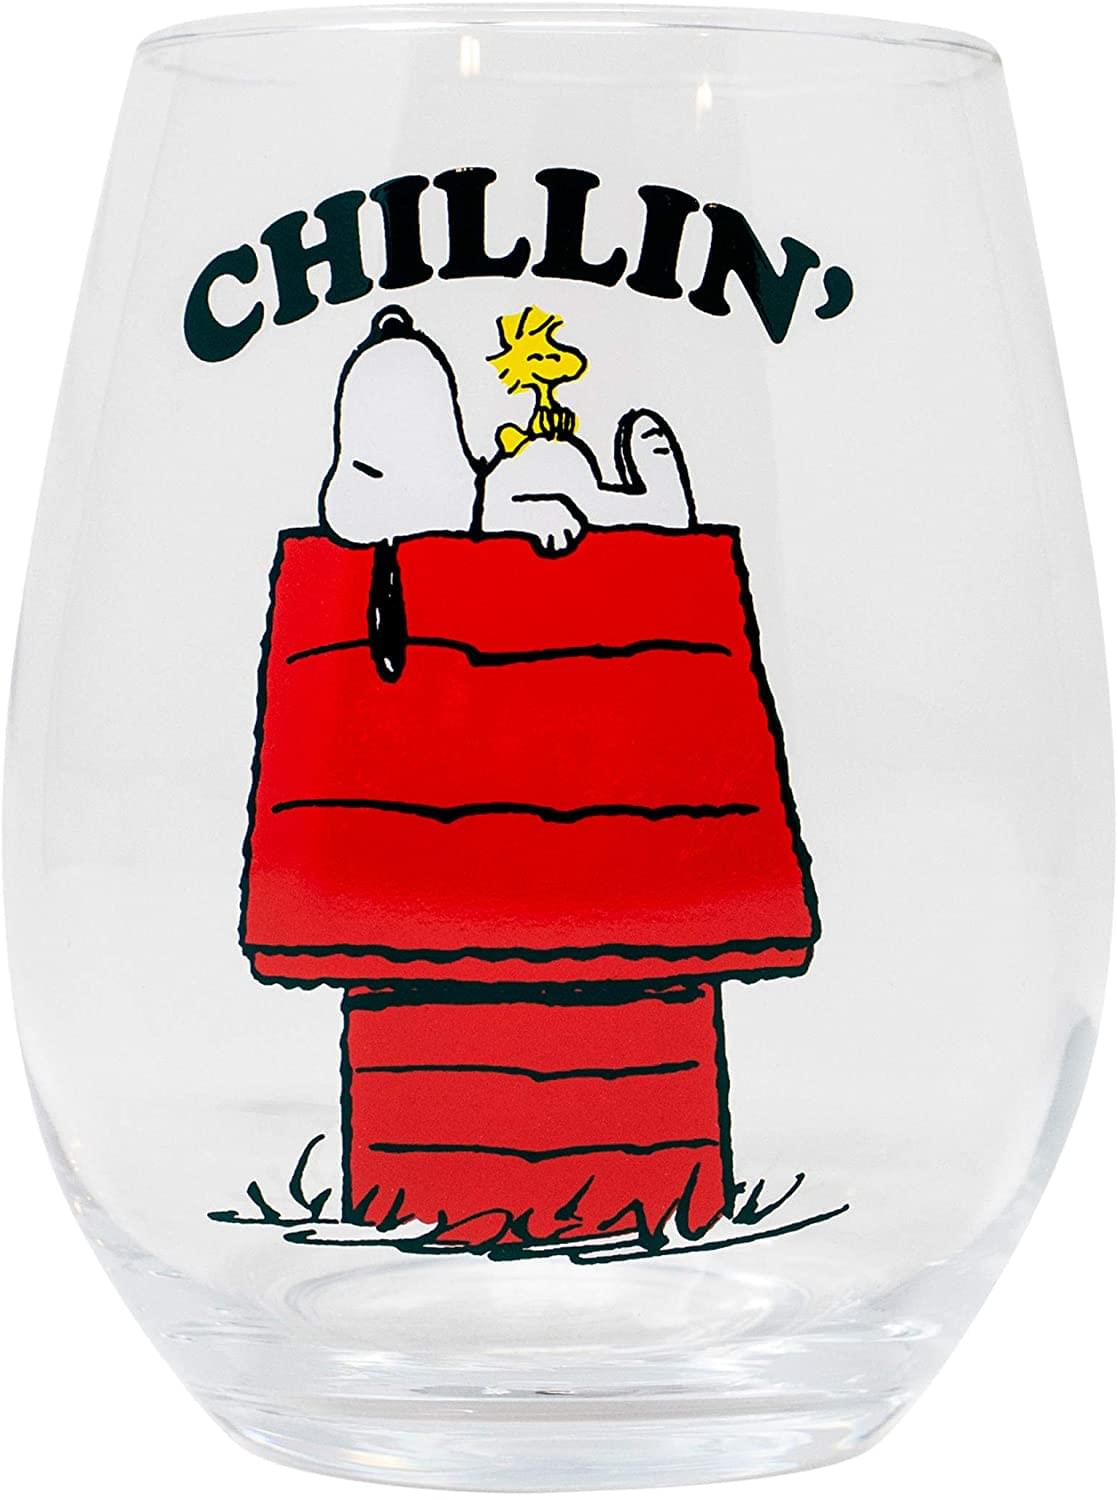 Peanuts Snoopy And Woodstock "Chillin" Stemless Wine Glass | Holds 20 Ounces